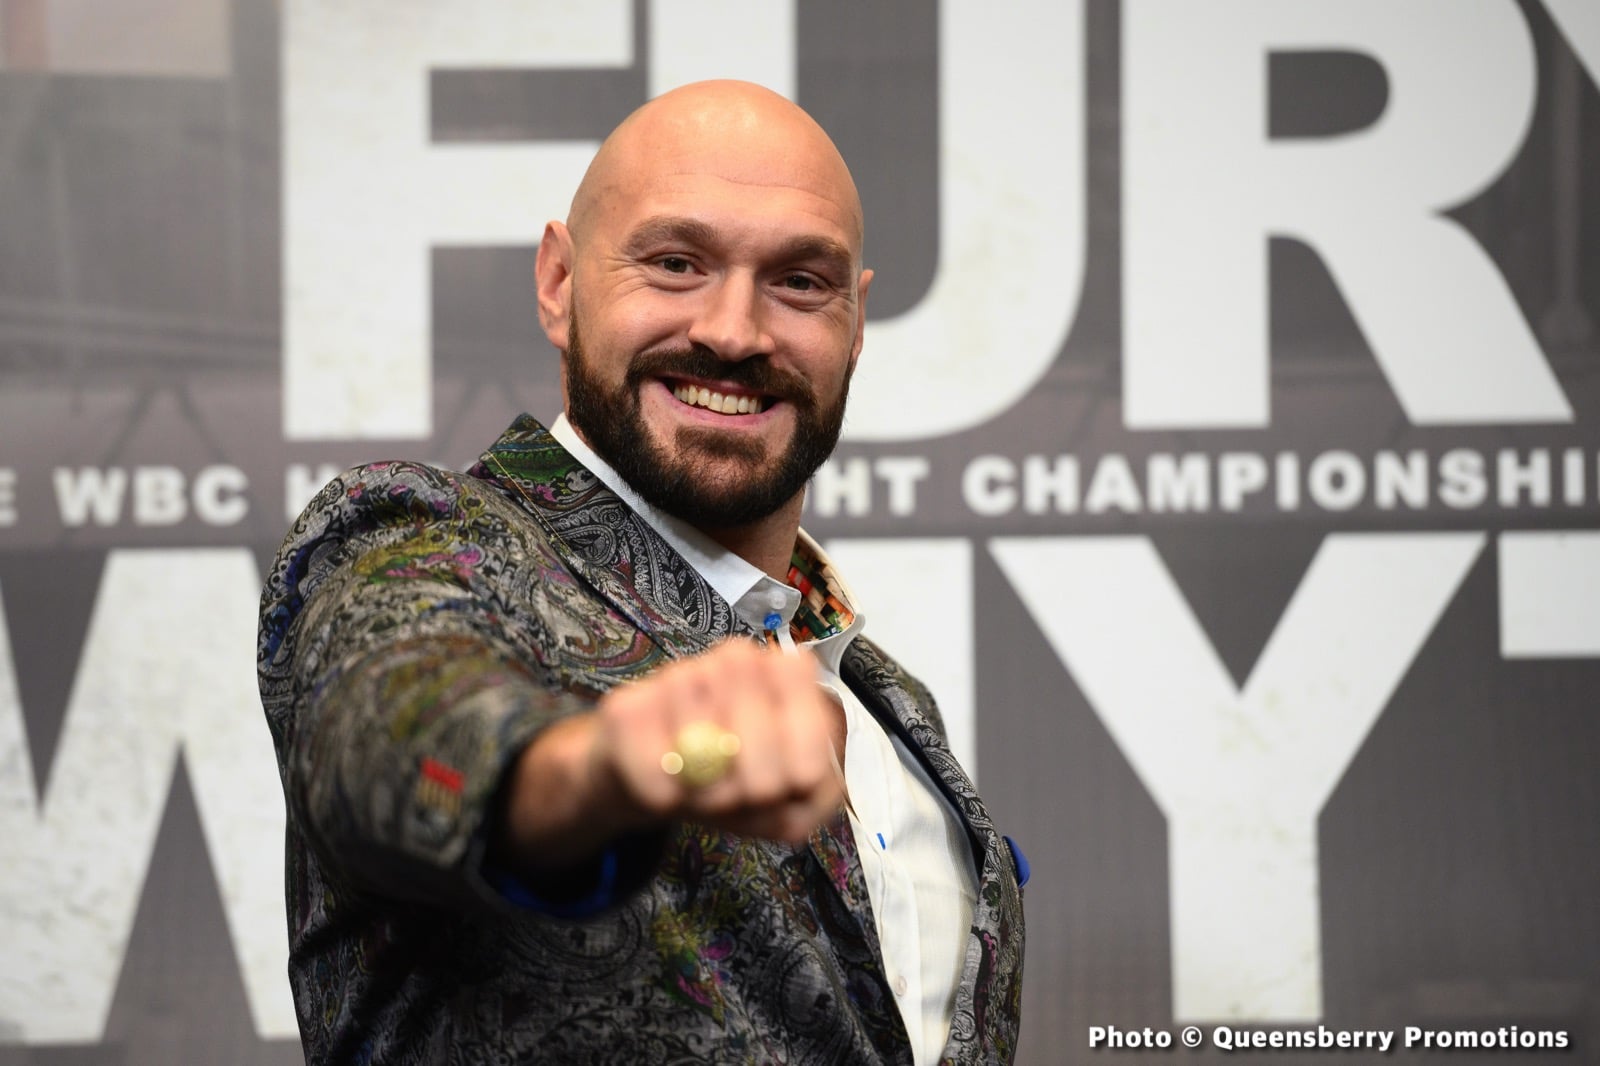 Salita: "Tyson Fury Is Almost Unbeatable… Dillian Whyte Has No Chance!"